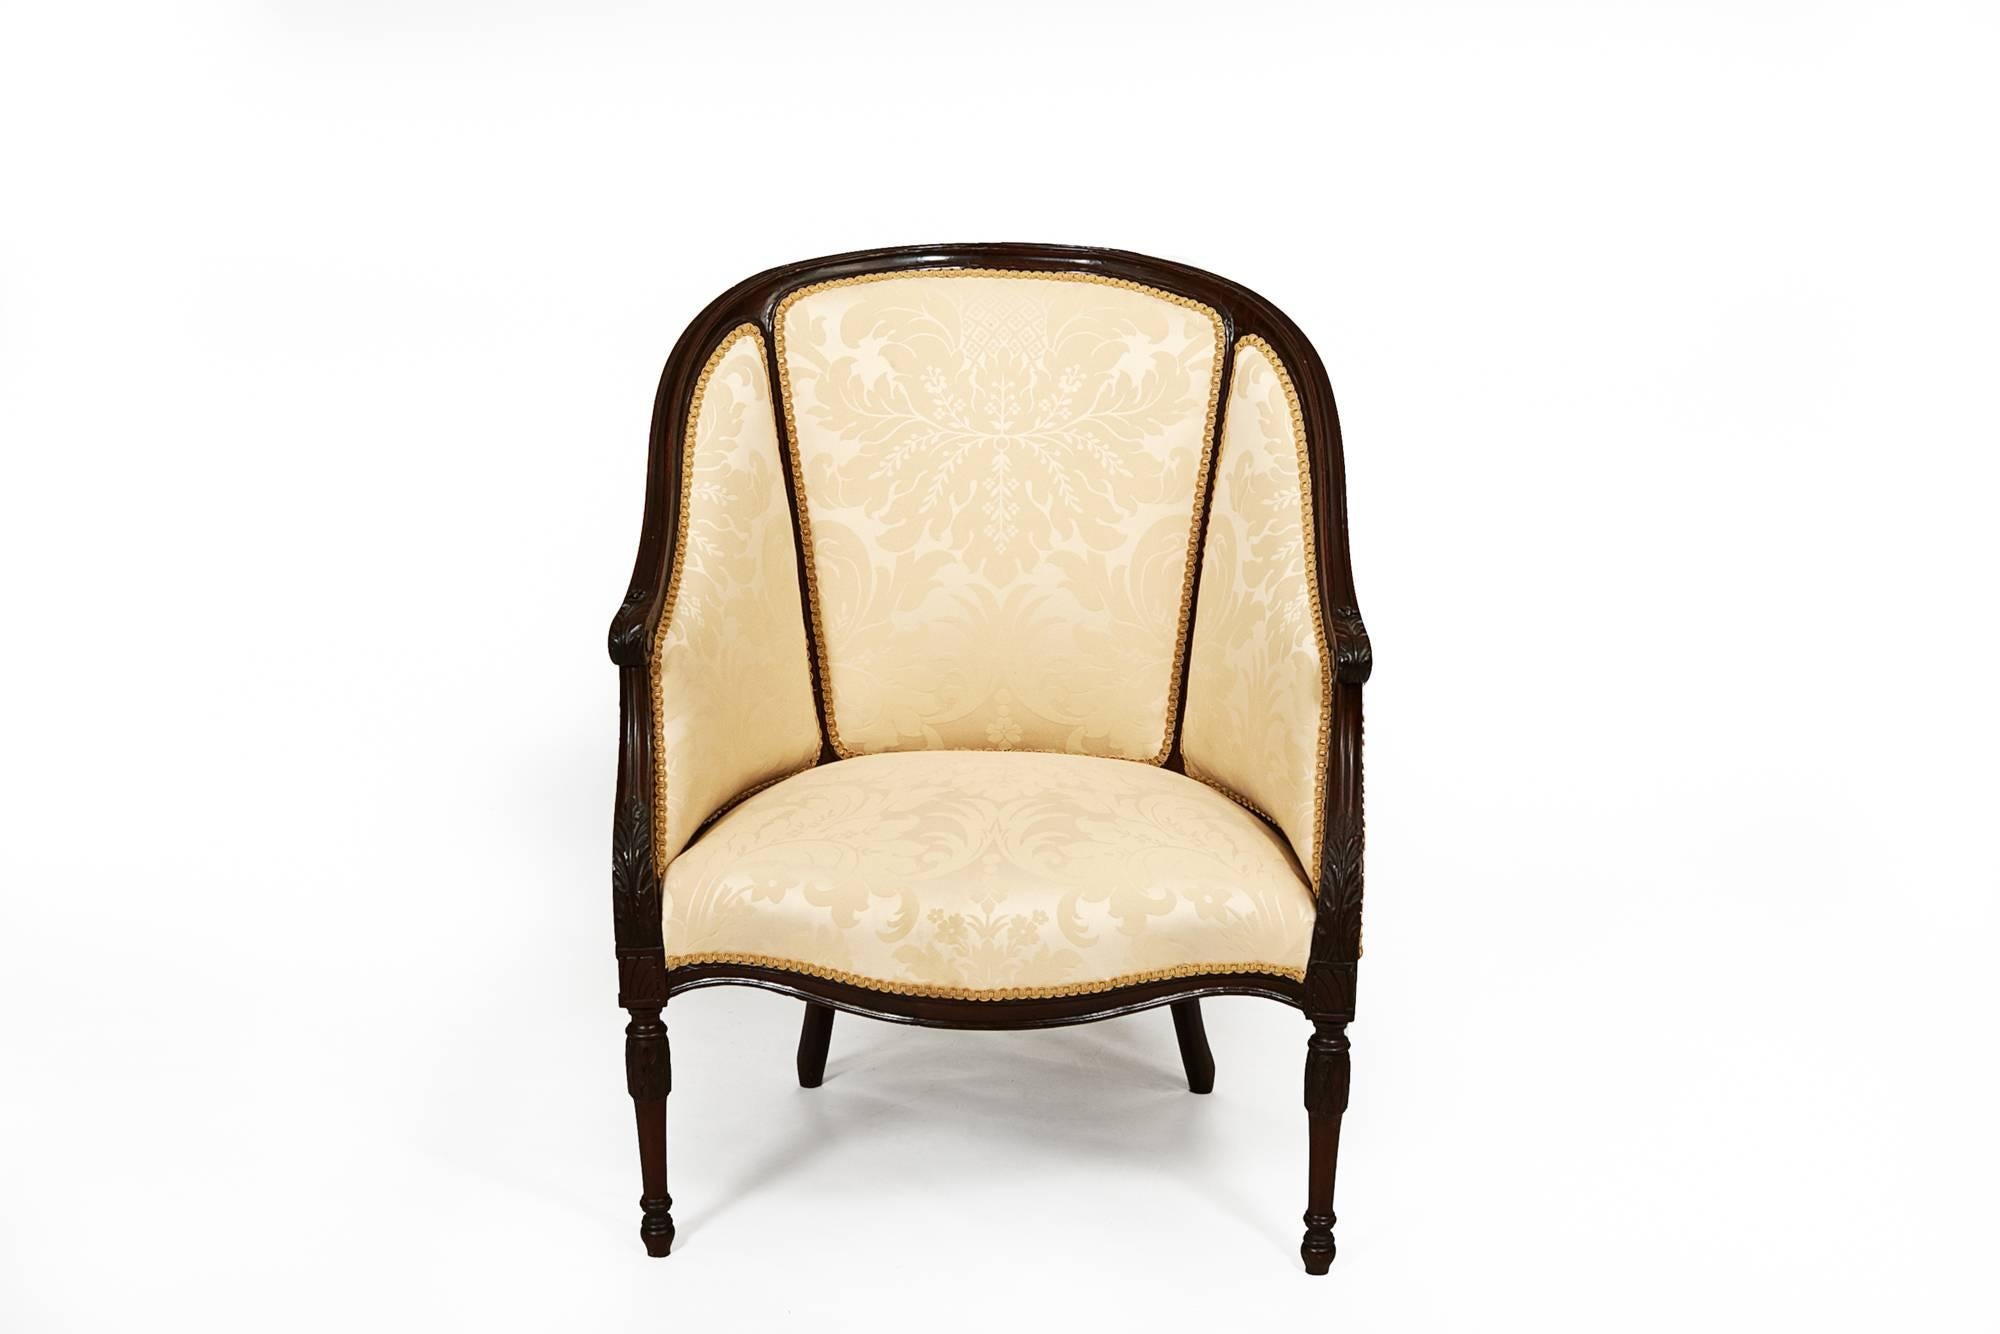 A fine 19th Century George III period mahogany Hepplewhite tub chair in the French taste.